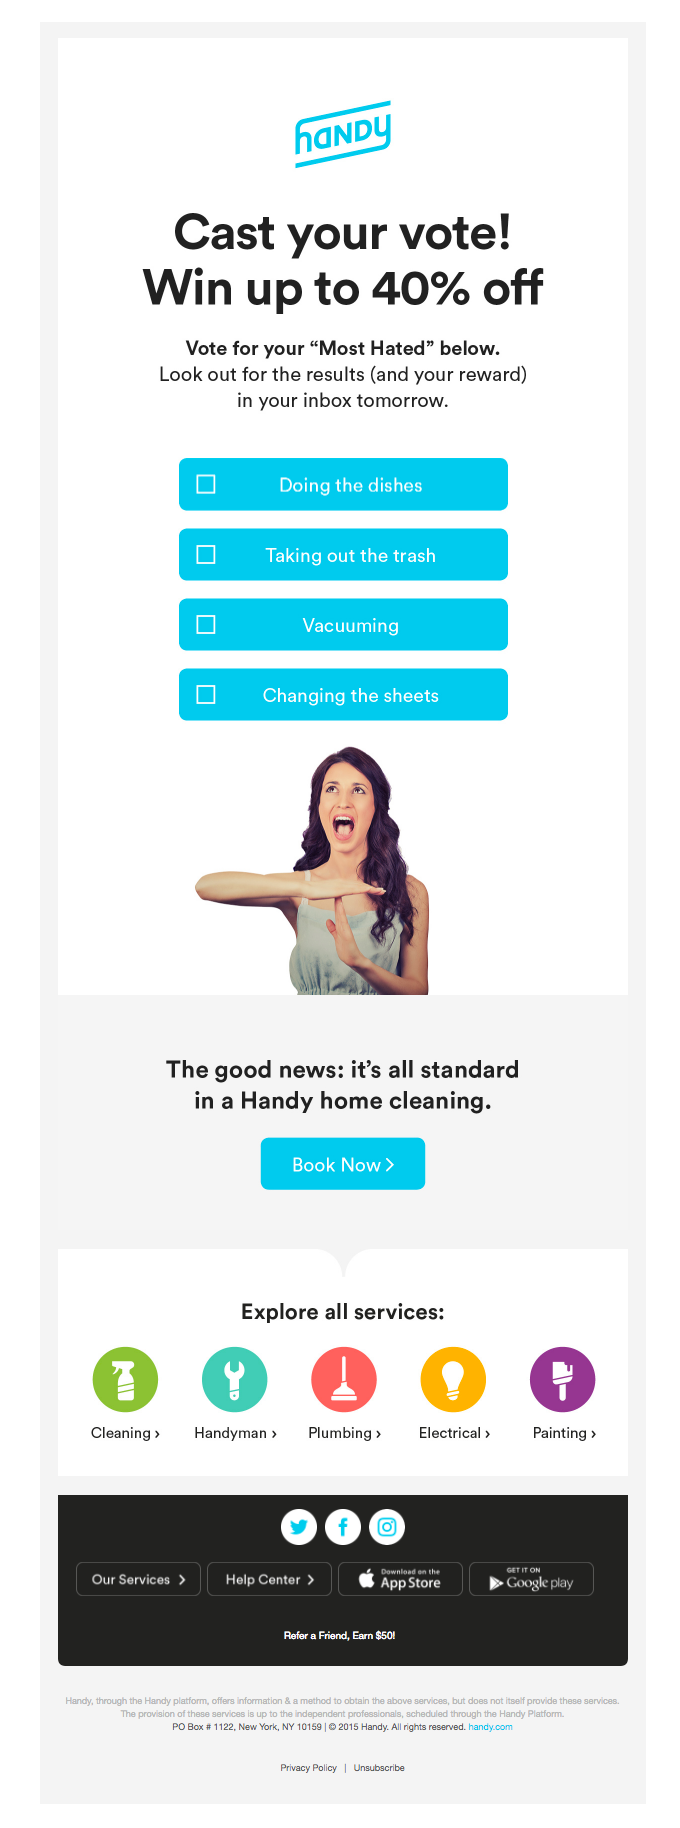 Really Good Emails, what do you hate most about cleaning?